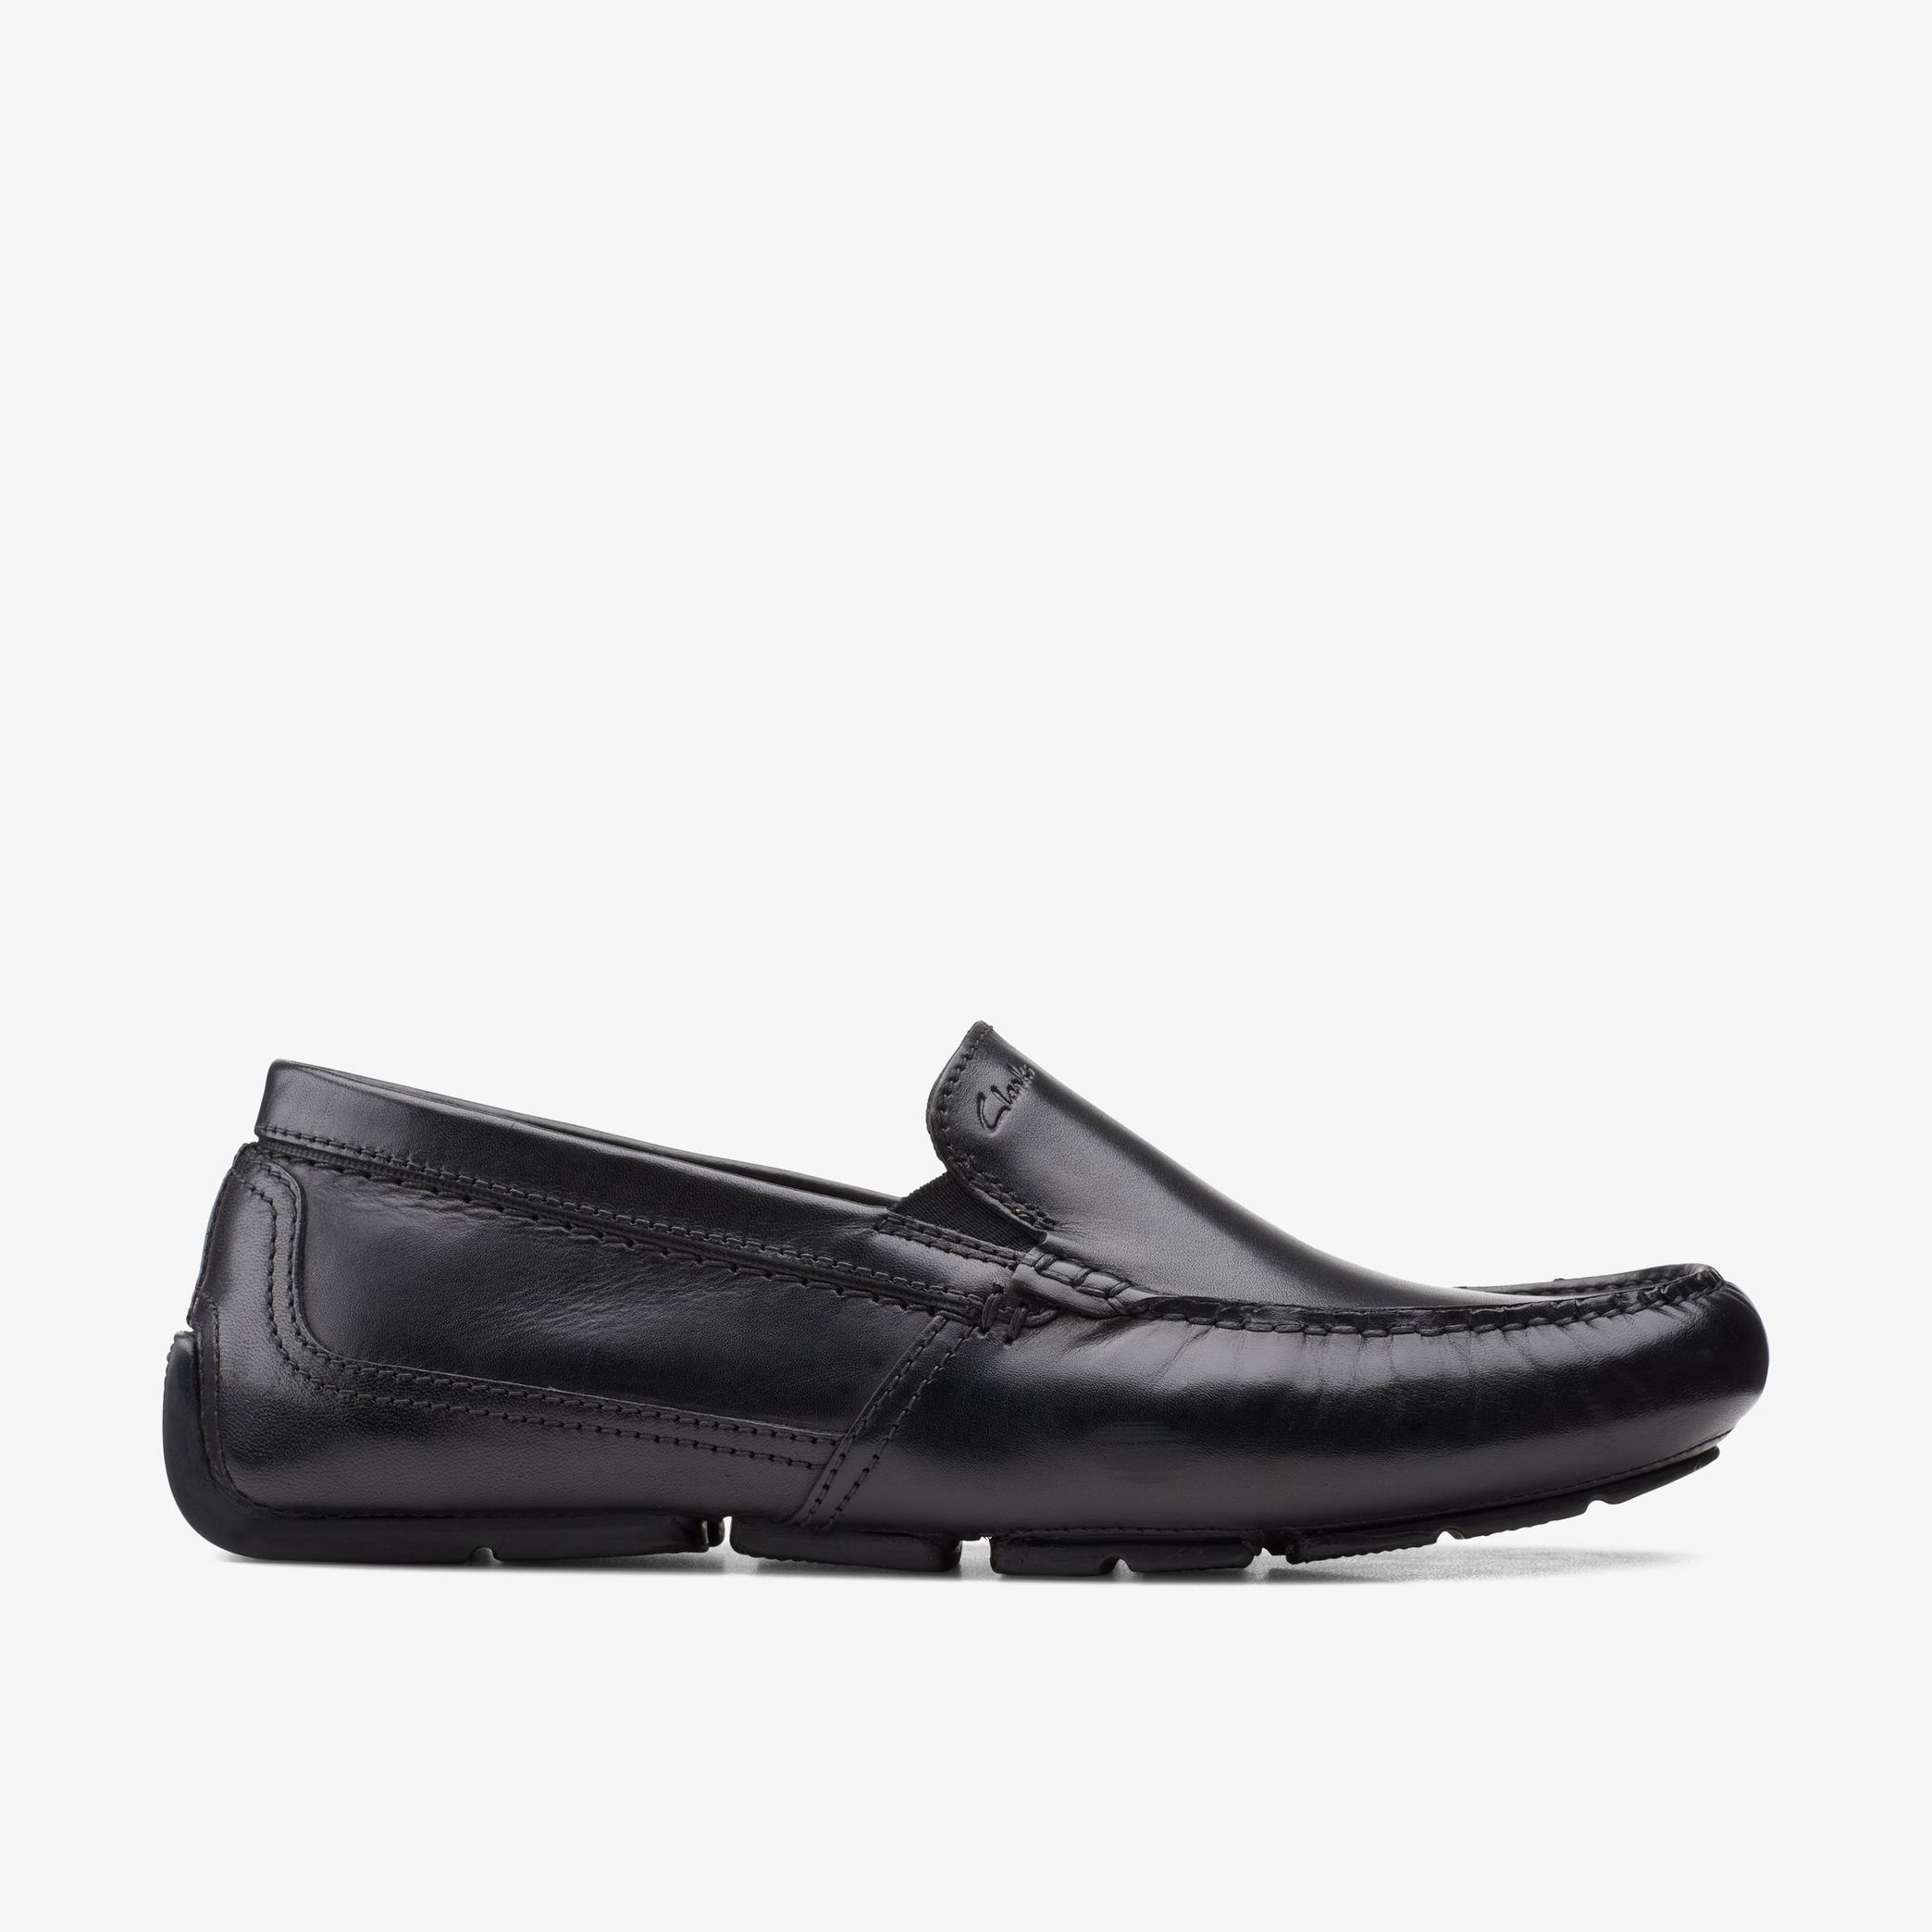 Markman Plain Black Leather Loafers, view 1 of 5